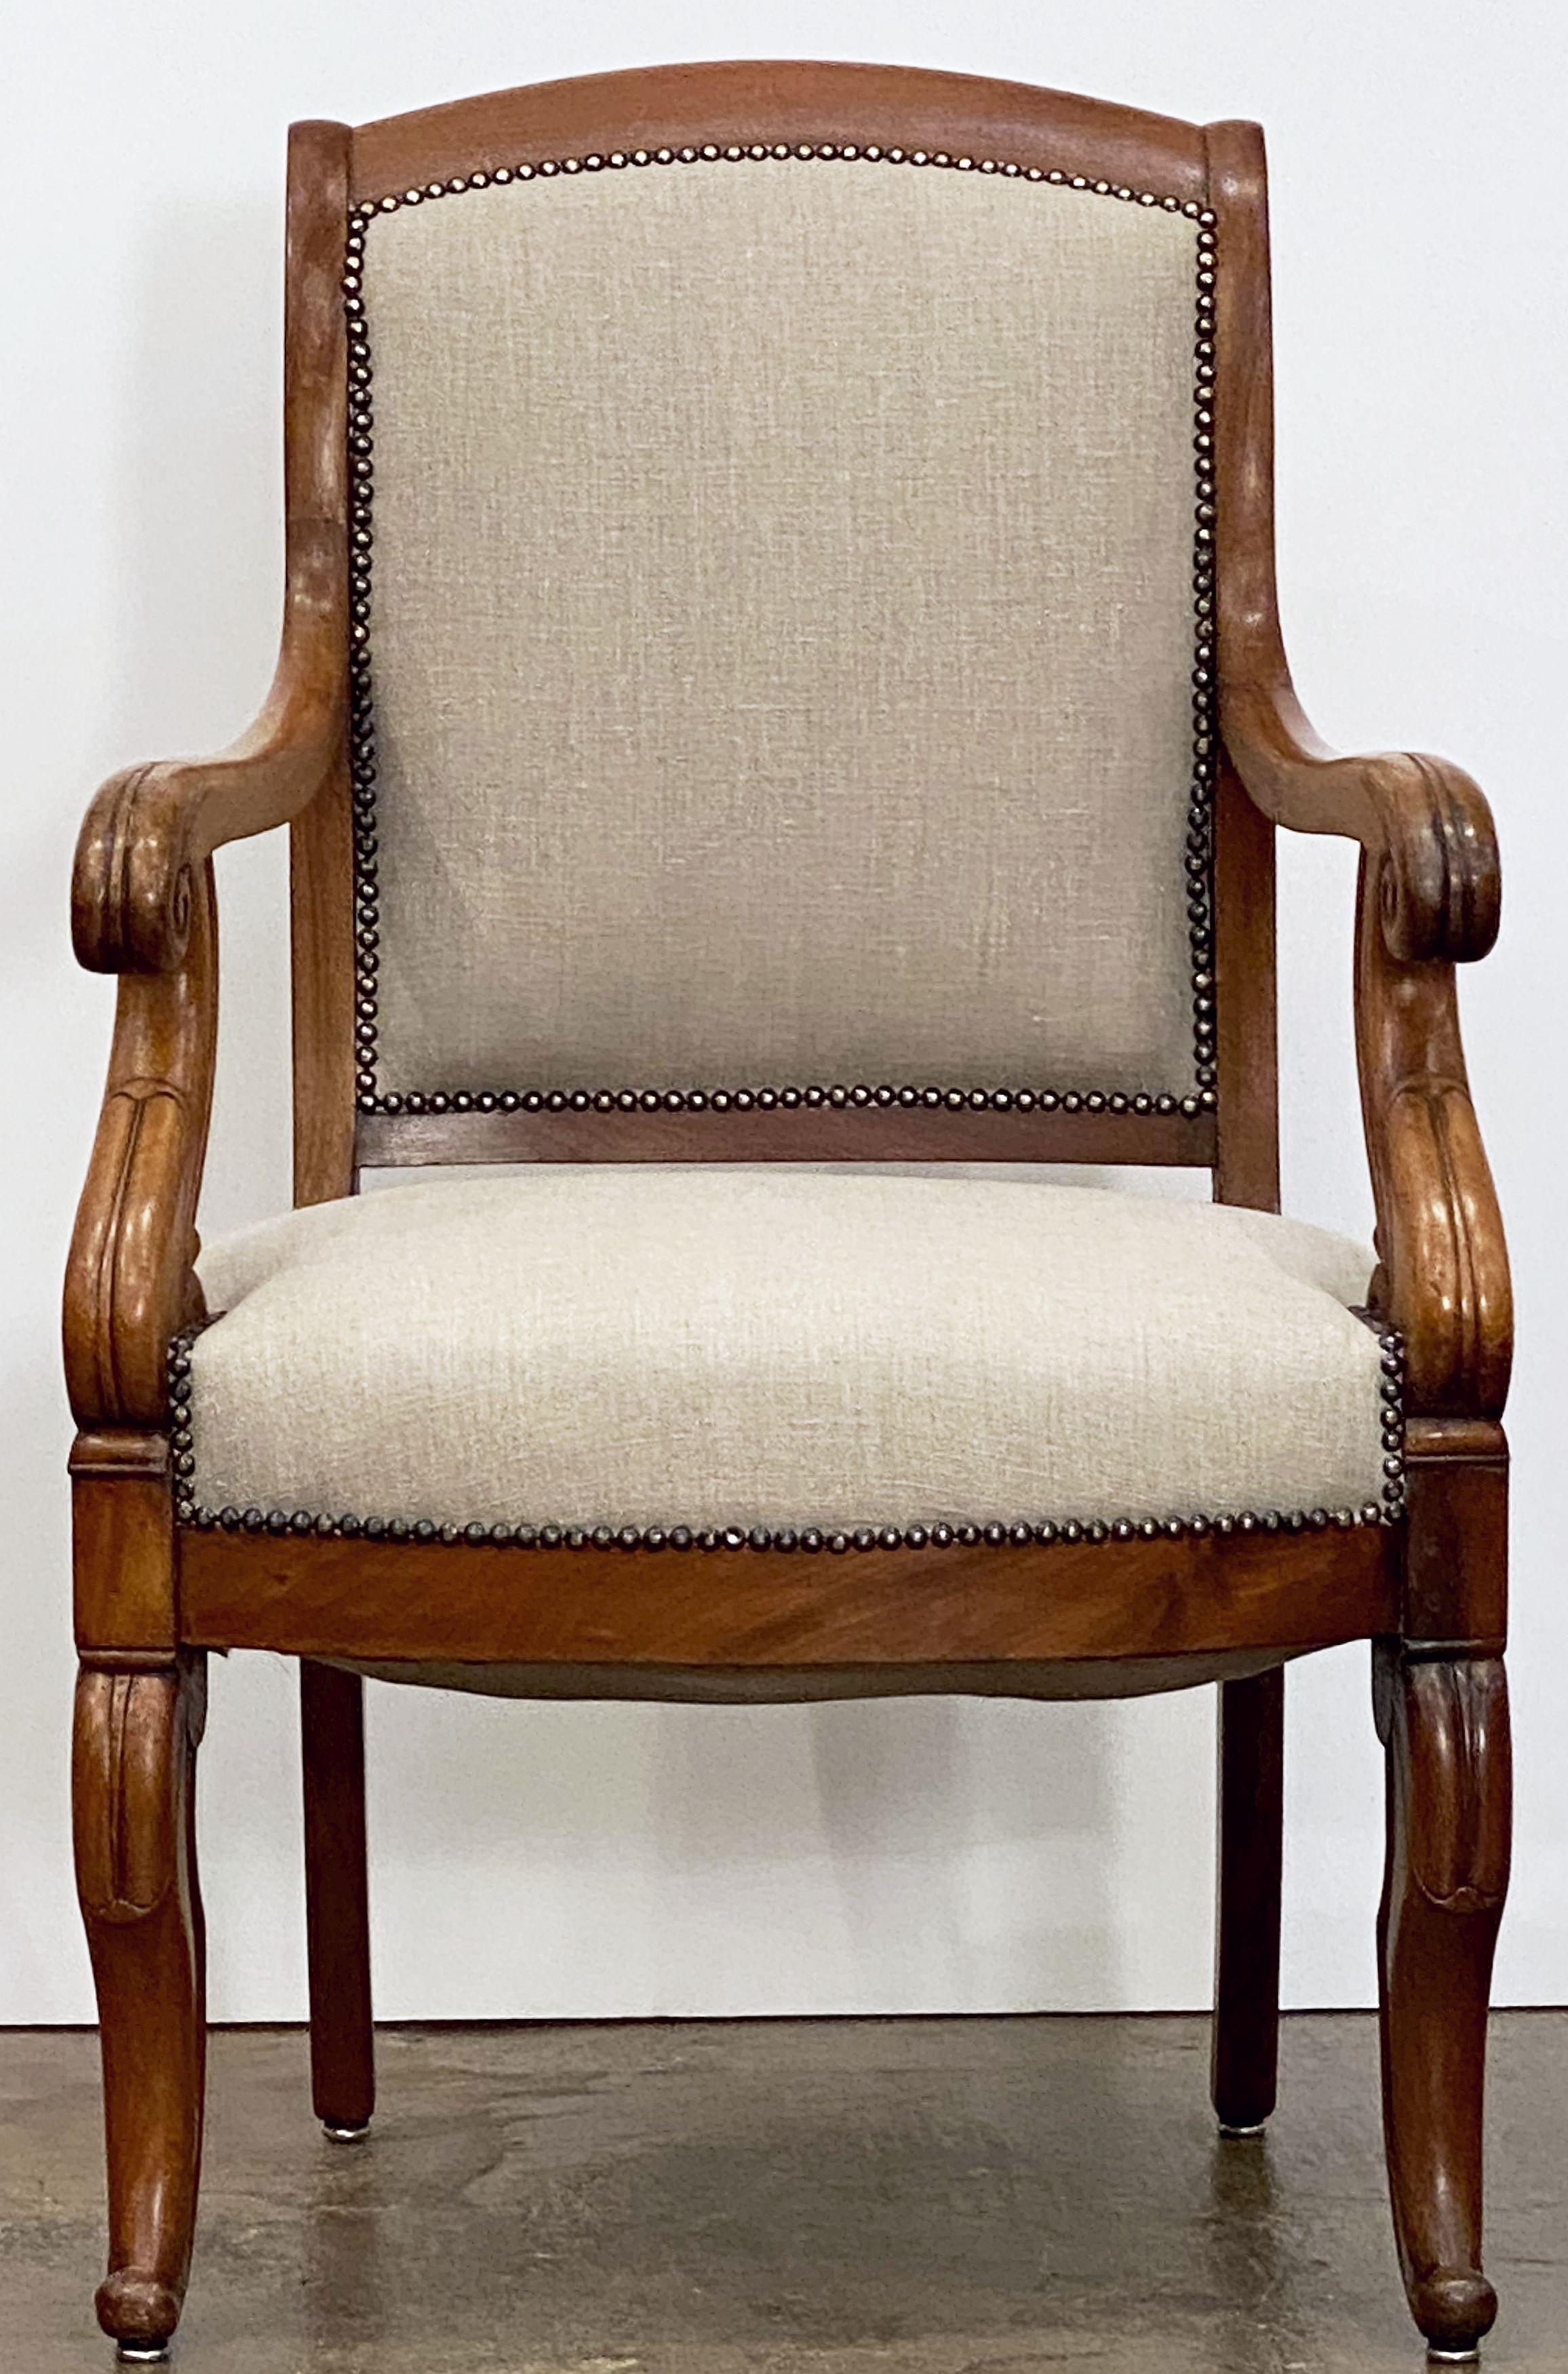 French Upholstered Fauteuil Armchair or Salon Chair of Walnut In Good Condition For Sale In Austin, TX